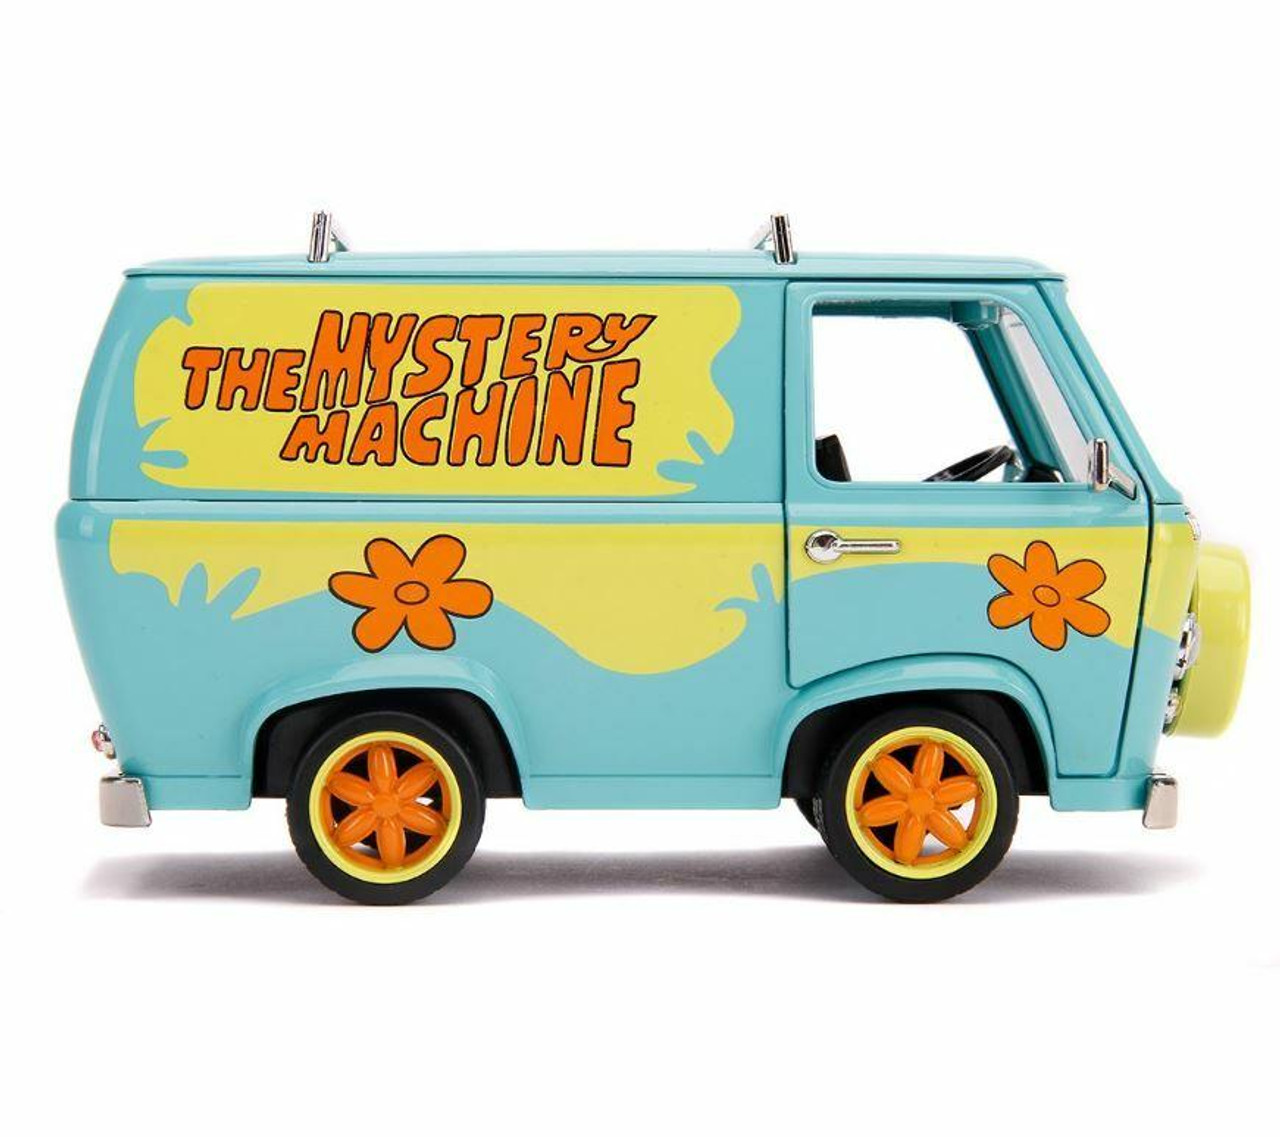 https://cdn11.bigcommerce.com/s-cy4lua1xoh/images/stencil/1280x1280/products/12563/73019/scooby-doo-mystery-machine-with-scooby-and-shaggy-figures-124-die-cast-vehicle-preorder-expected-ship-date-june-2022__82445.1654606822.jpg?c=1?imbypass=on